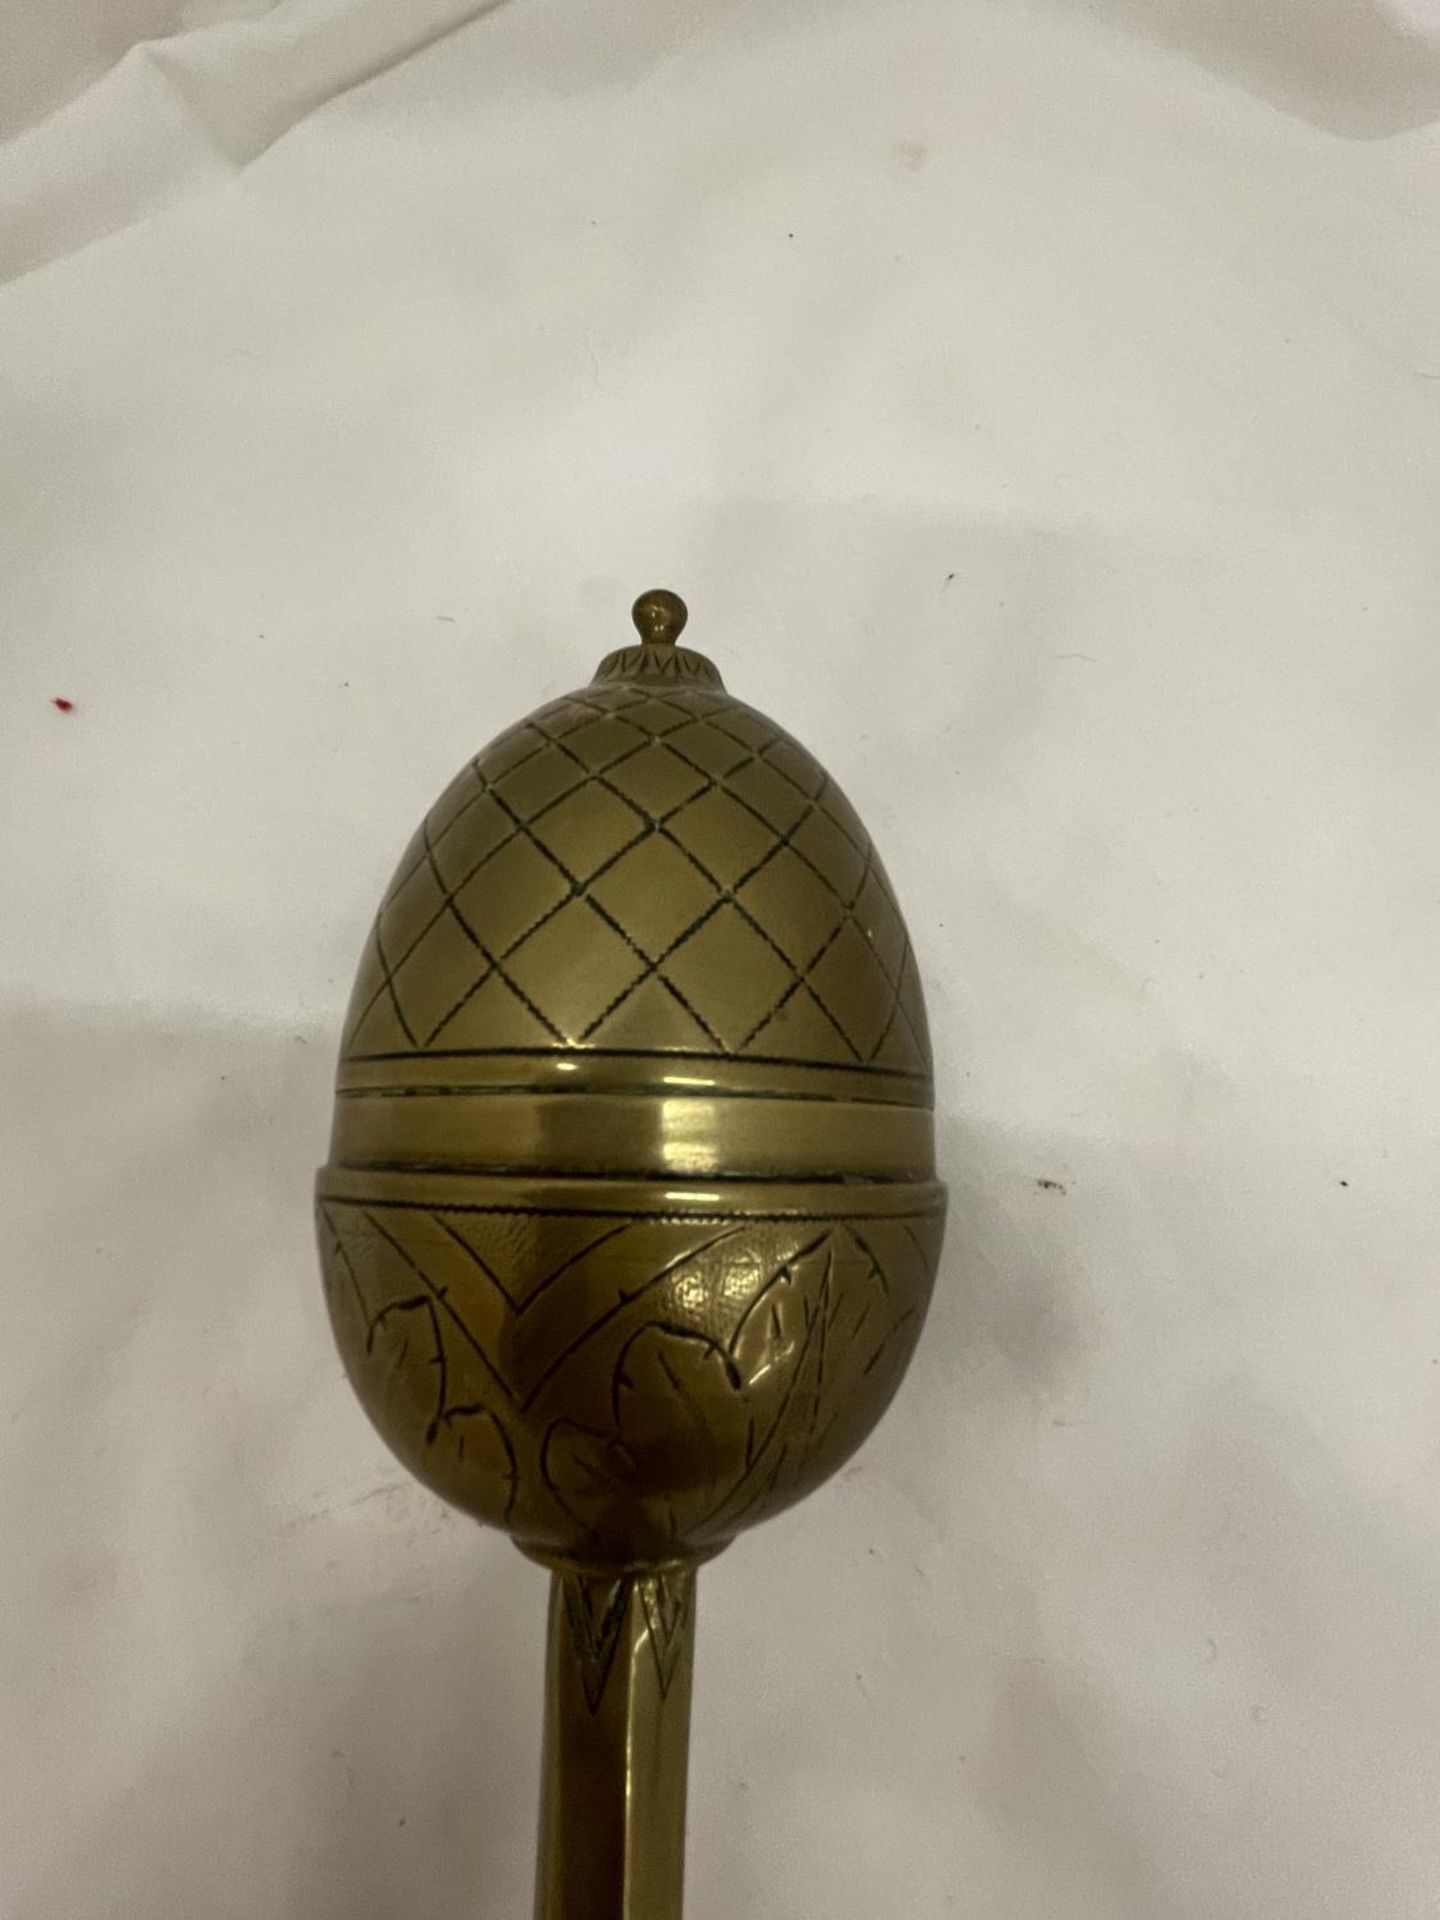 A BRASS HOLY WATER DISPENCER WITH AN ACORN STYLE TOP - Image 3 of 4